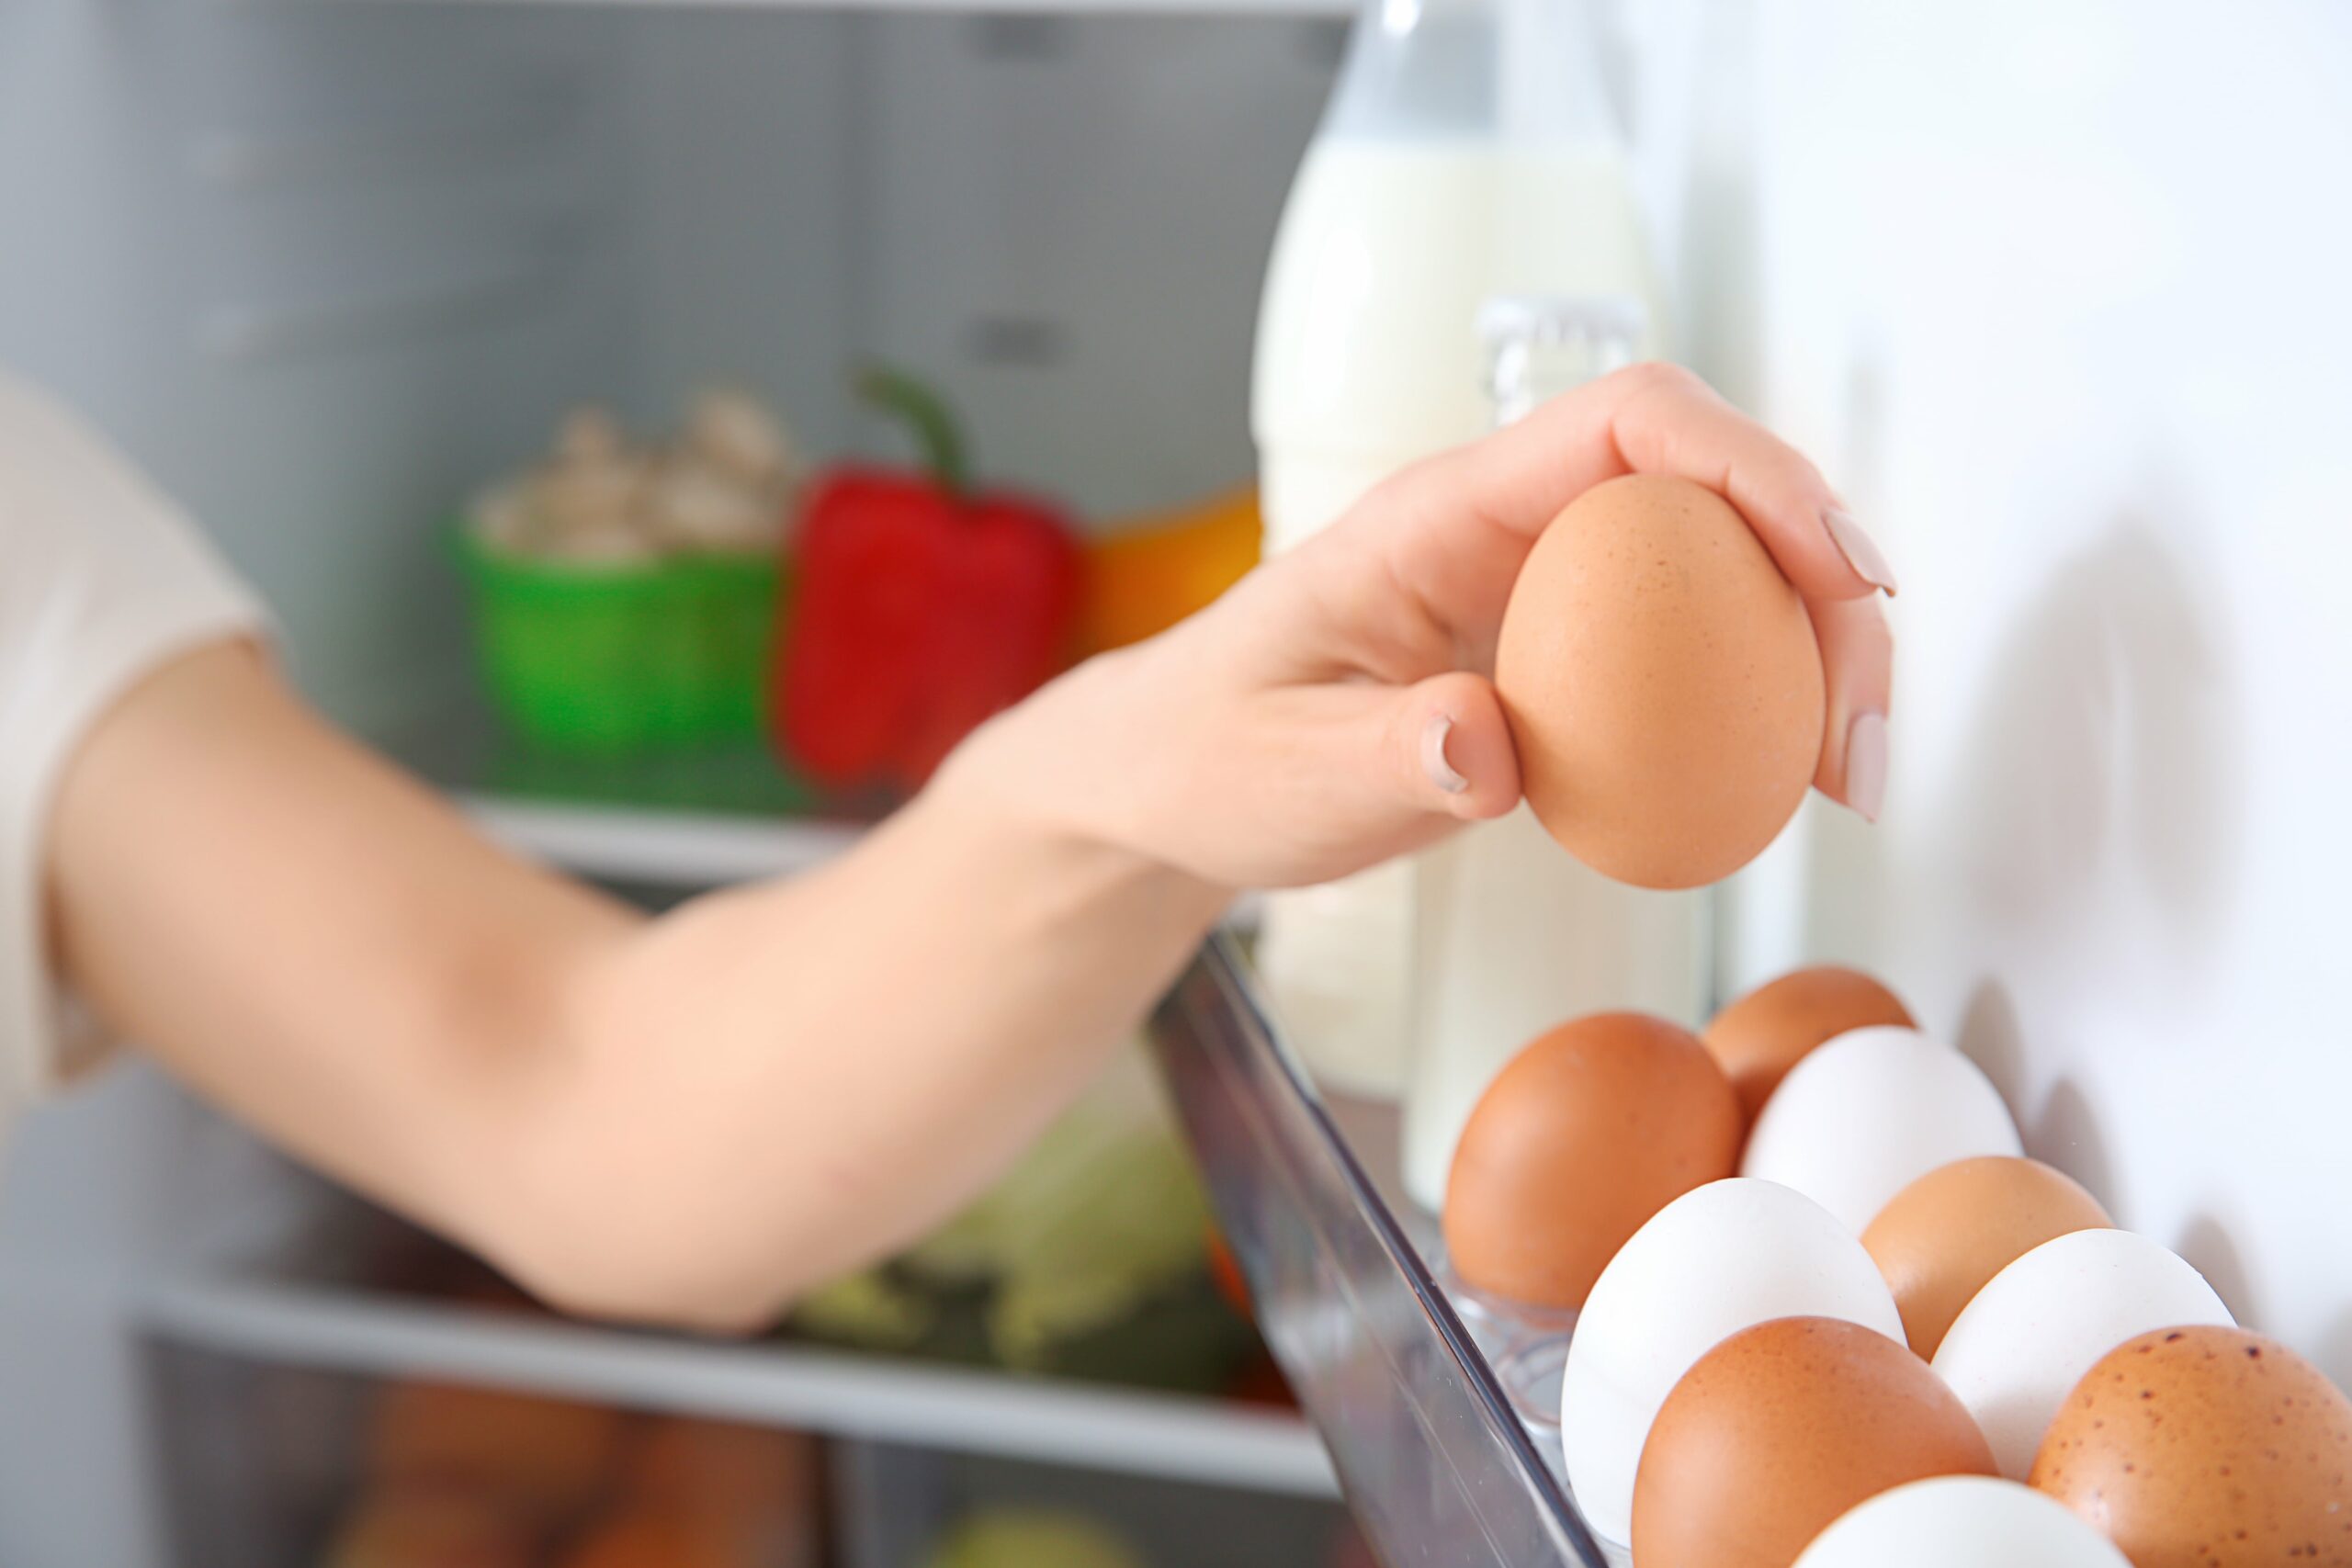 Should You Refrigerate Eggs?